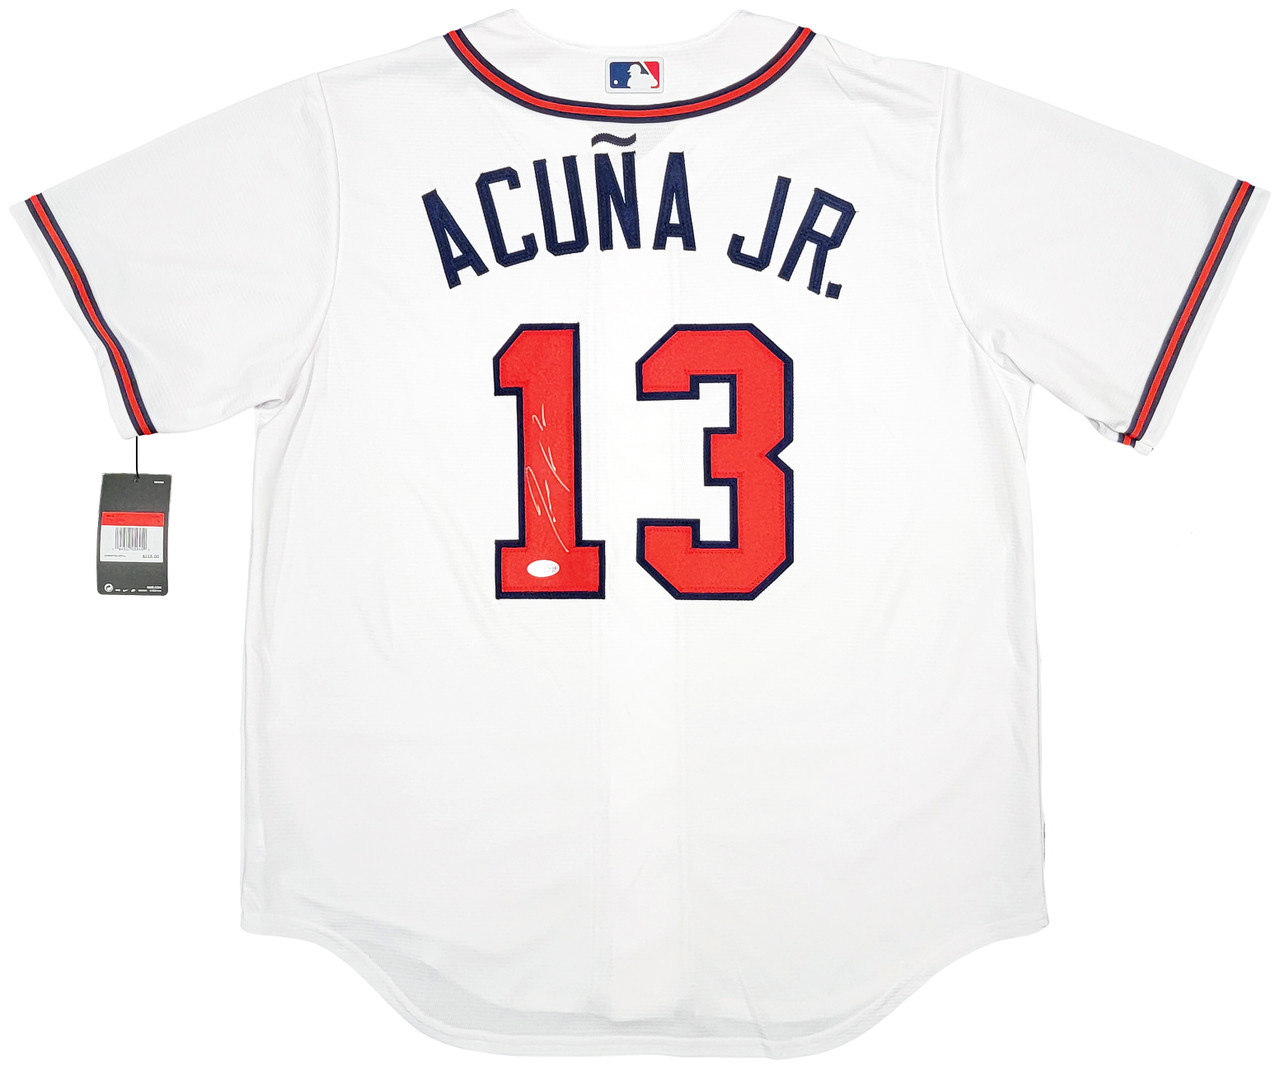  Braves Ronald Acuna Jr. Autographed Authentic White Jersey Size  XL Beckett BAS : Sports & Outdoors